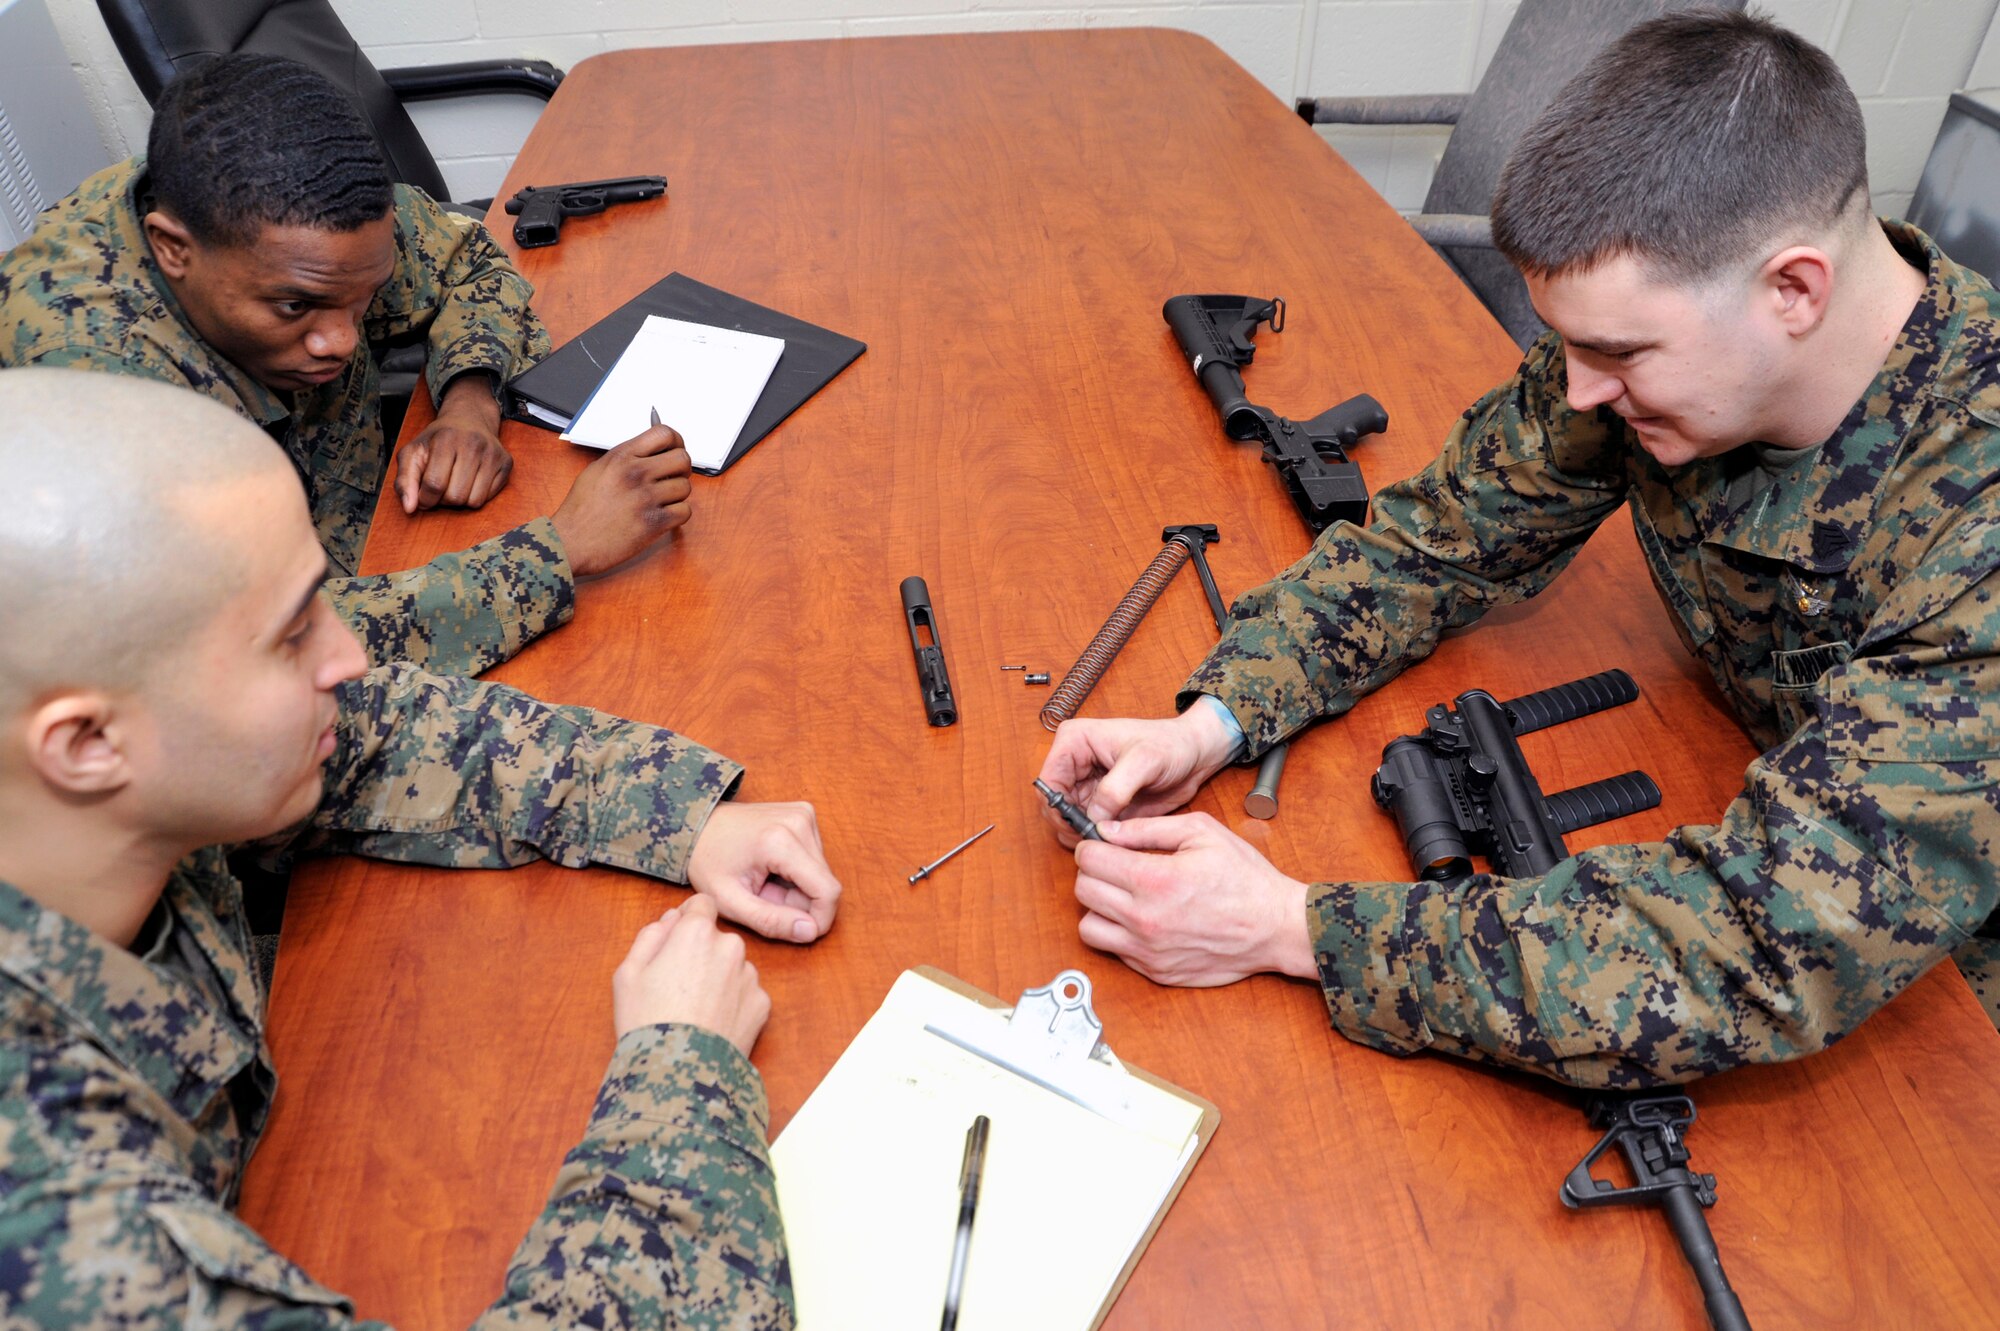 Marine Sergeant Daniel Bason, Marine Transport Squadron Andrews operations chief, refreshes Lance Corporals Samael J. FanesteEspina and Jean Baptiste Henry, Marine Transport Squadron Andrews operations technicians, on how to field strip the M4 carbine rifle during their Lance Corporal’s Course here, Jan. 10. The course provides training in drill, Marine Corps history, codes of conduct, mentorship and many other classes geared toward improving the Marines before they take on the responsibility of becoming NCOs. (U.S. Air Force Photo/Senior Airman Perry Aston)